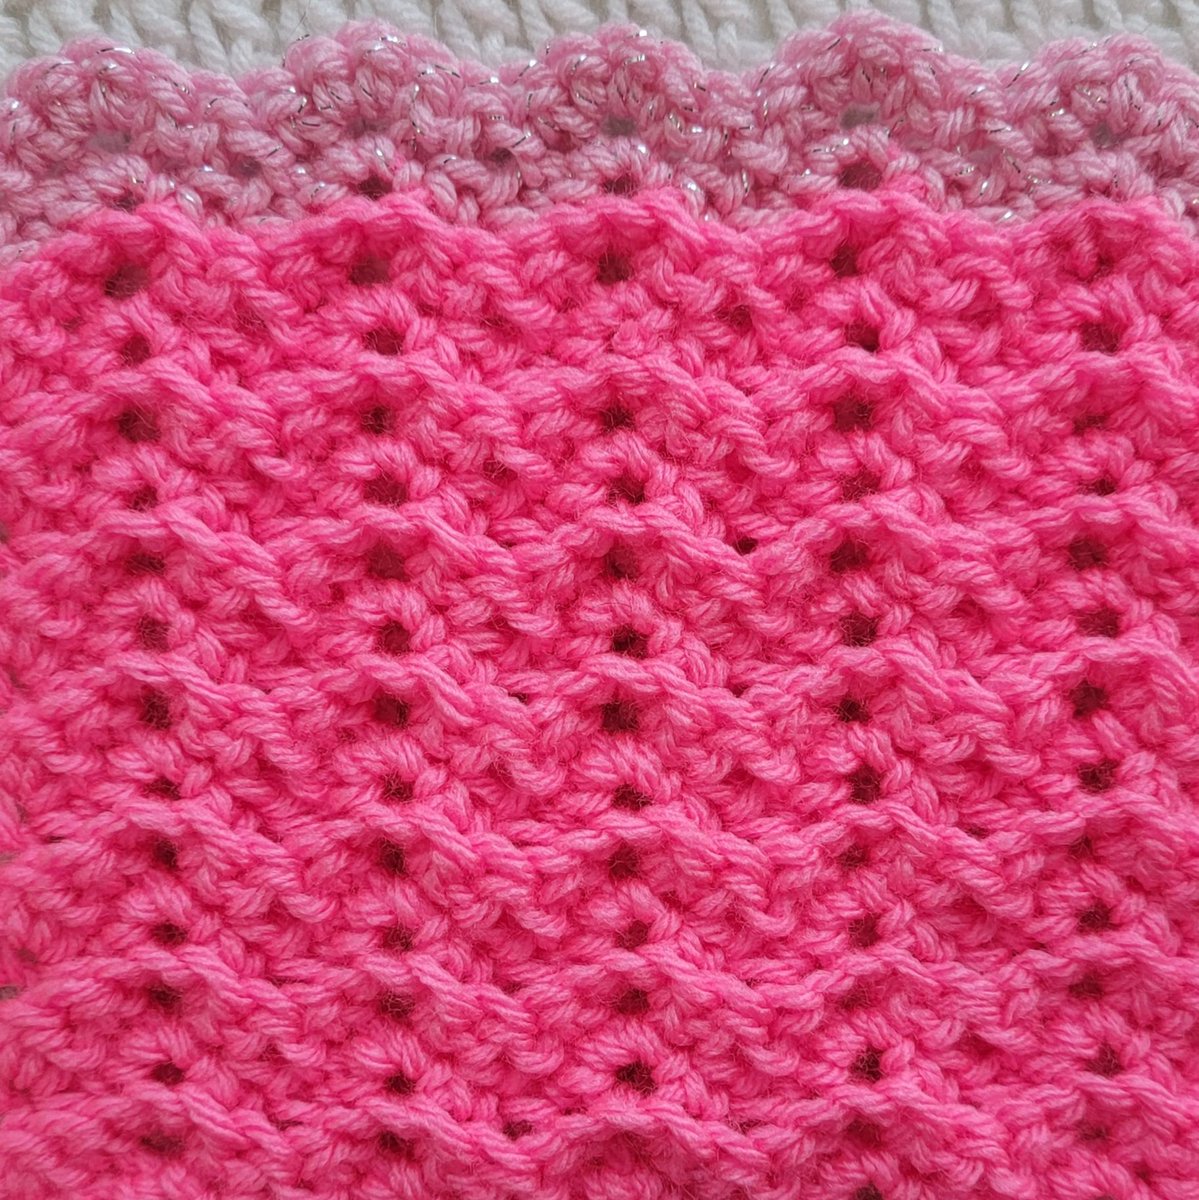 New video tutorial up on my YouTube channel on the Dreamy Ripple Stitch! Find me on youtube @crochetmelovely! Like and subscribe! 💕💫👋 #yarn #video #crochetvideos #crochet #crocheting #crocheted #crochetersofinstagram #instamood #friends #viral #crochetlove #crochetstitch